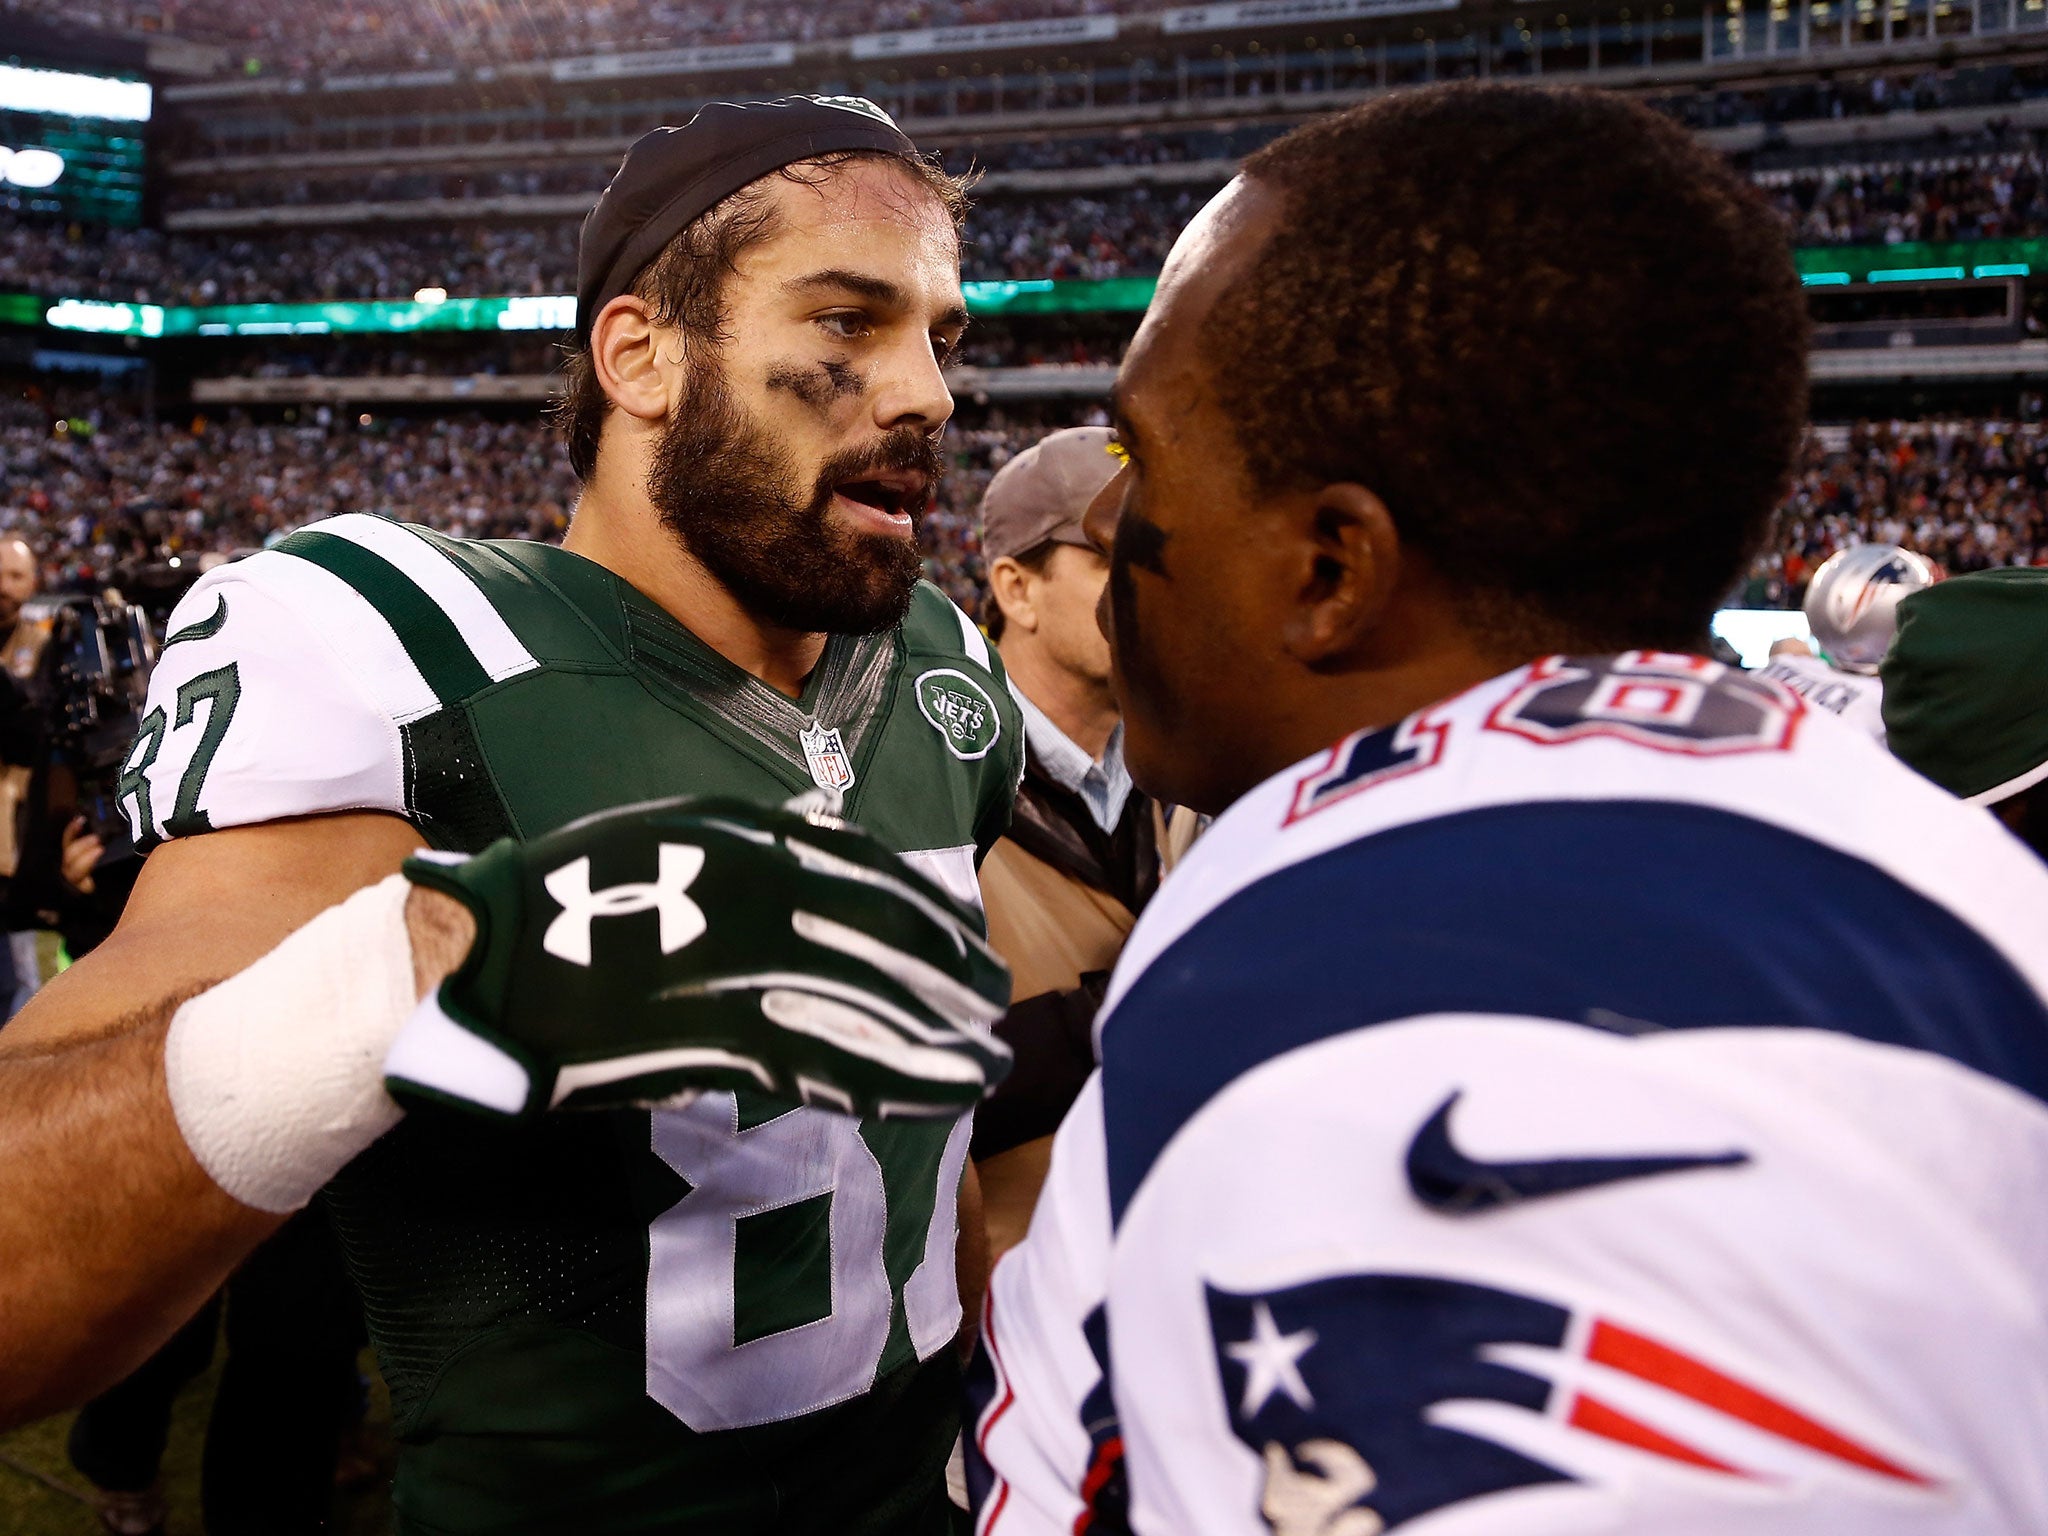 Eric Decker of the New York Jets speaks with Matthew Slater of the New England Patriots